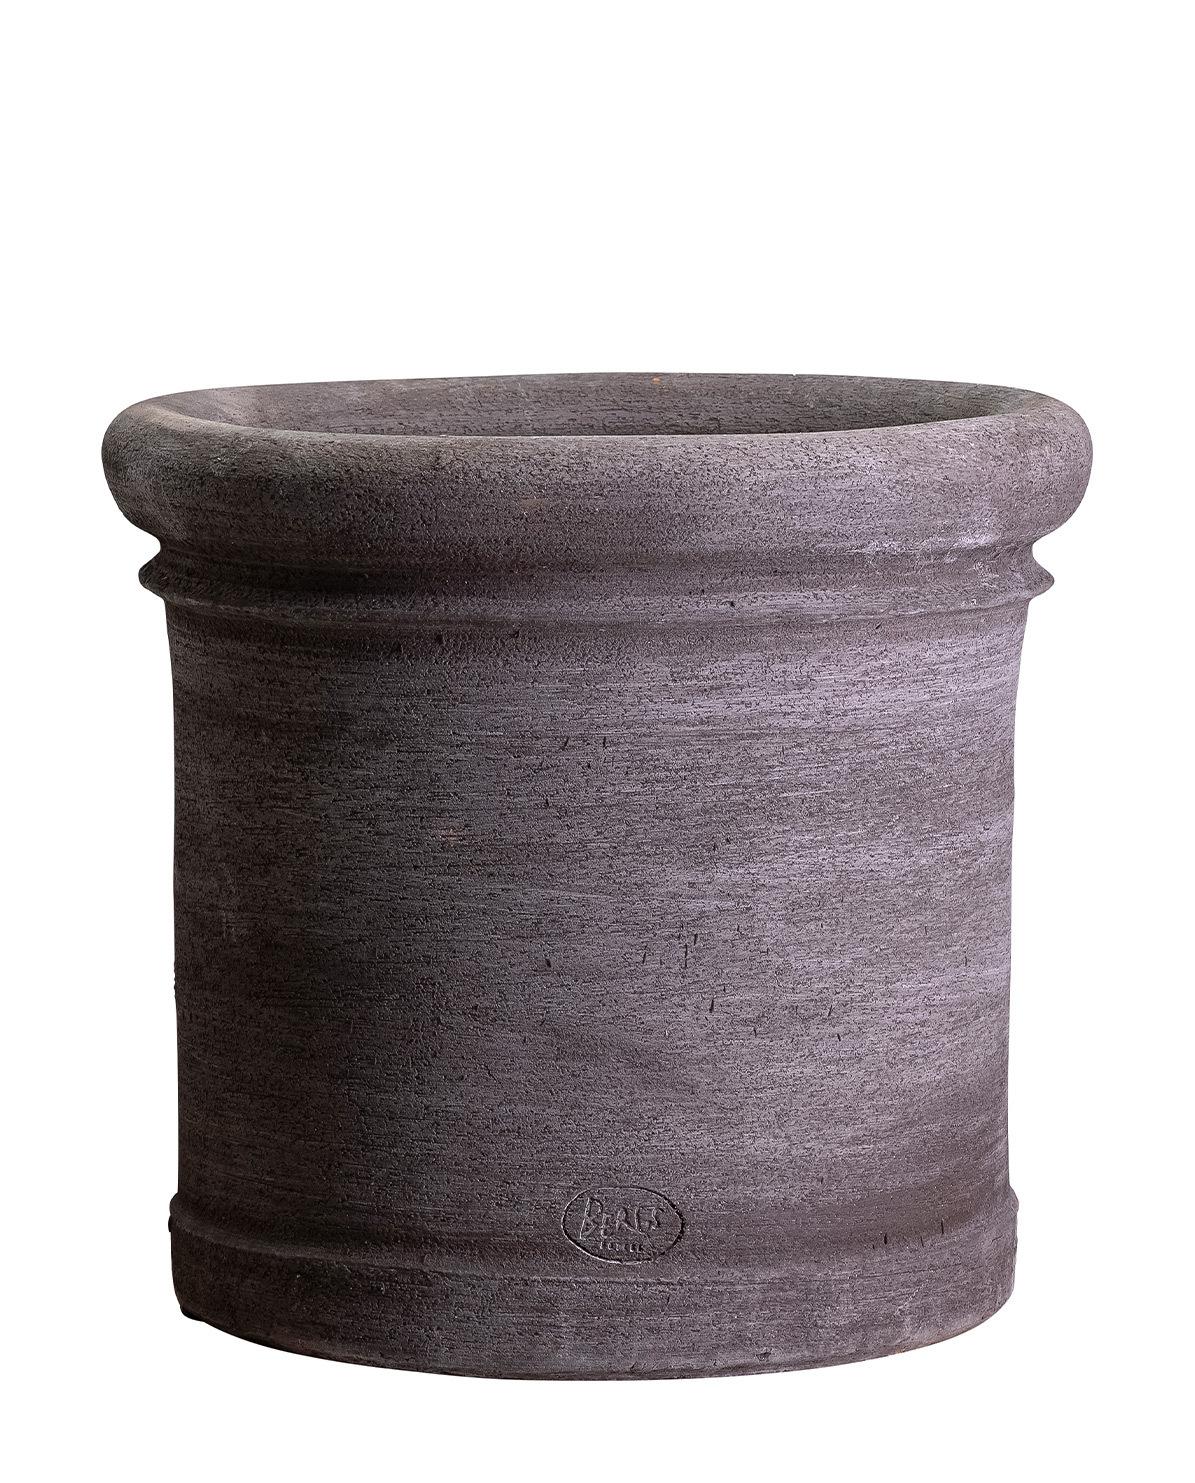 Outdoor Blumentopf Cilindro Raw Pot One Size